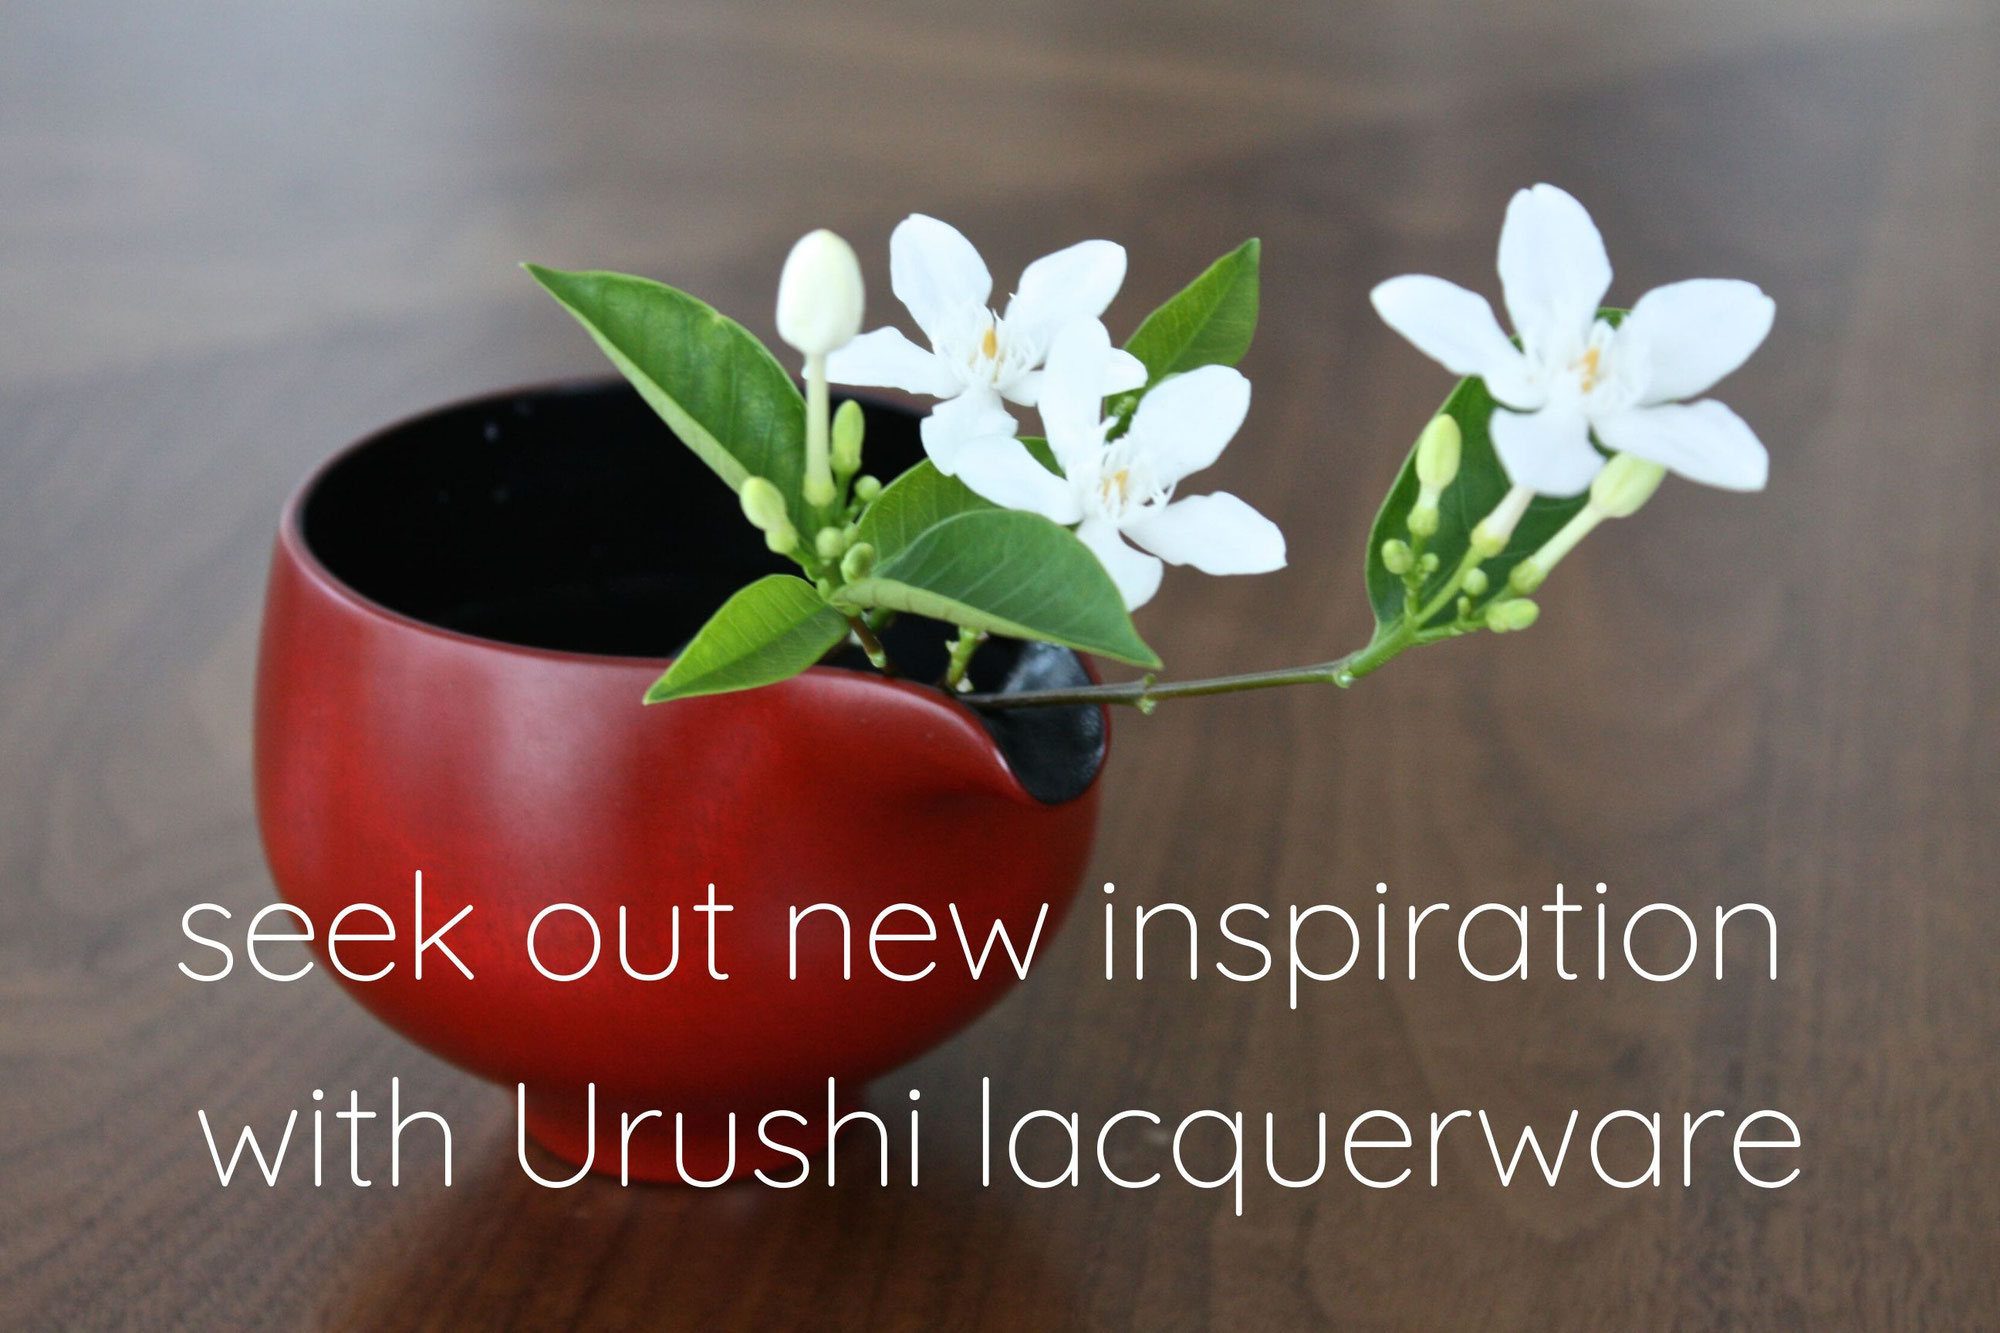 seek out new inspiration with Urushi lacquerware